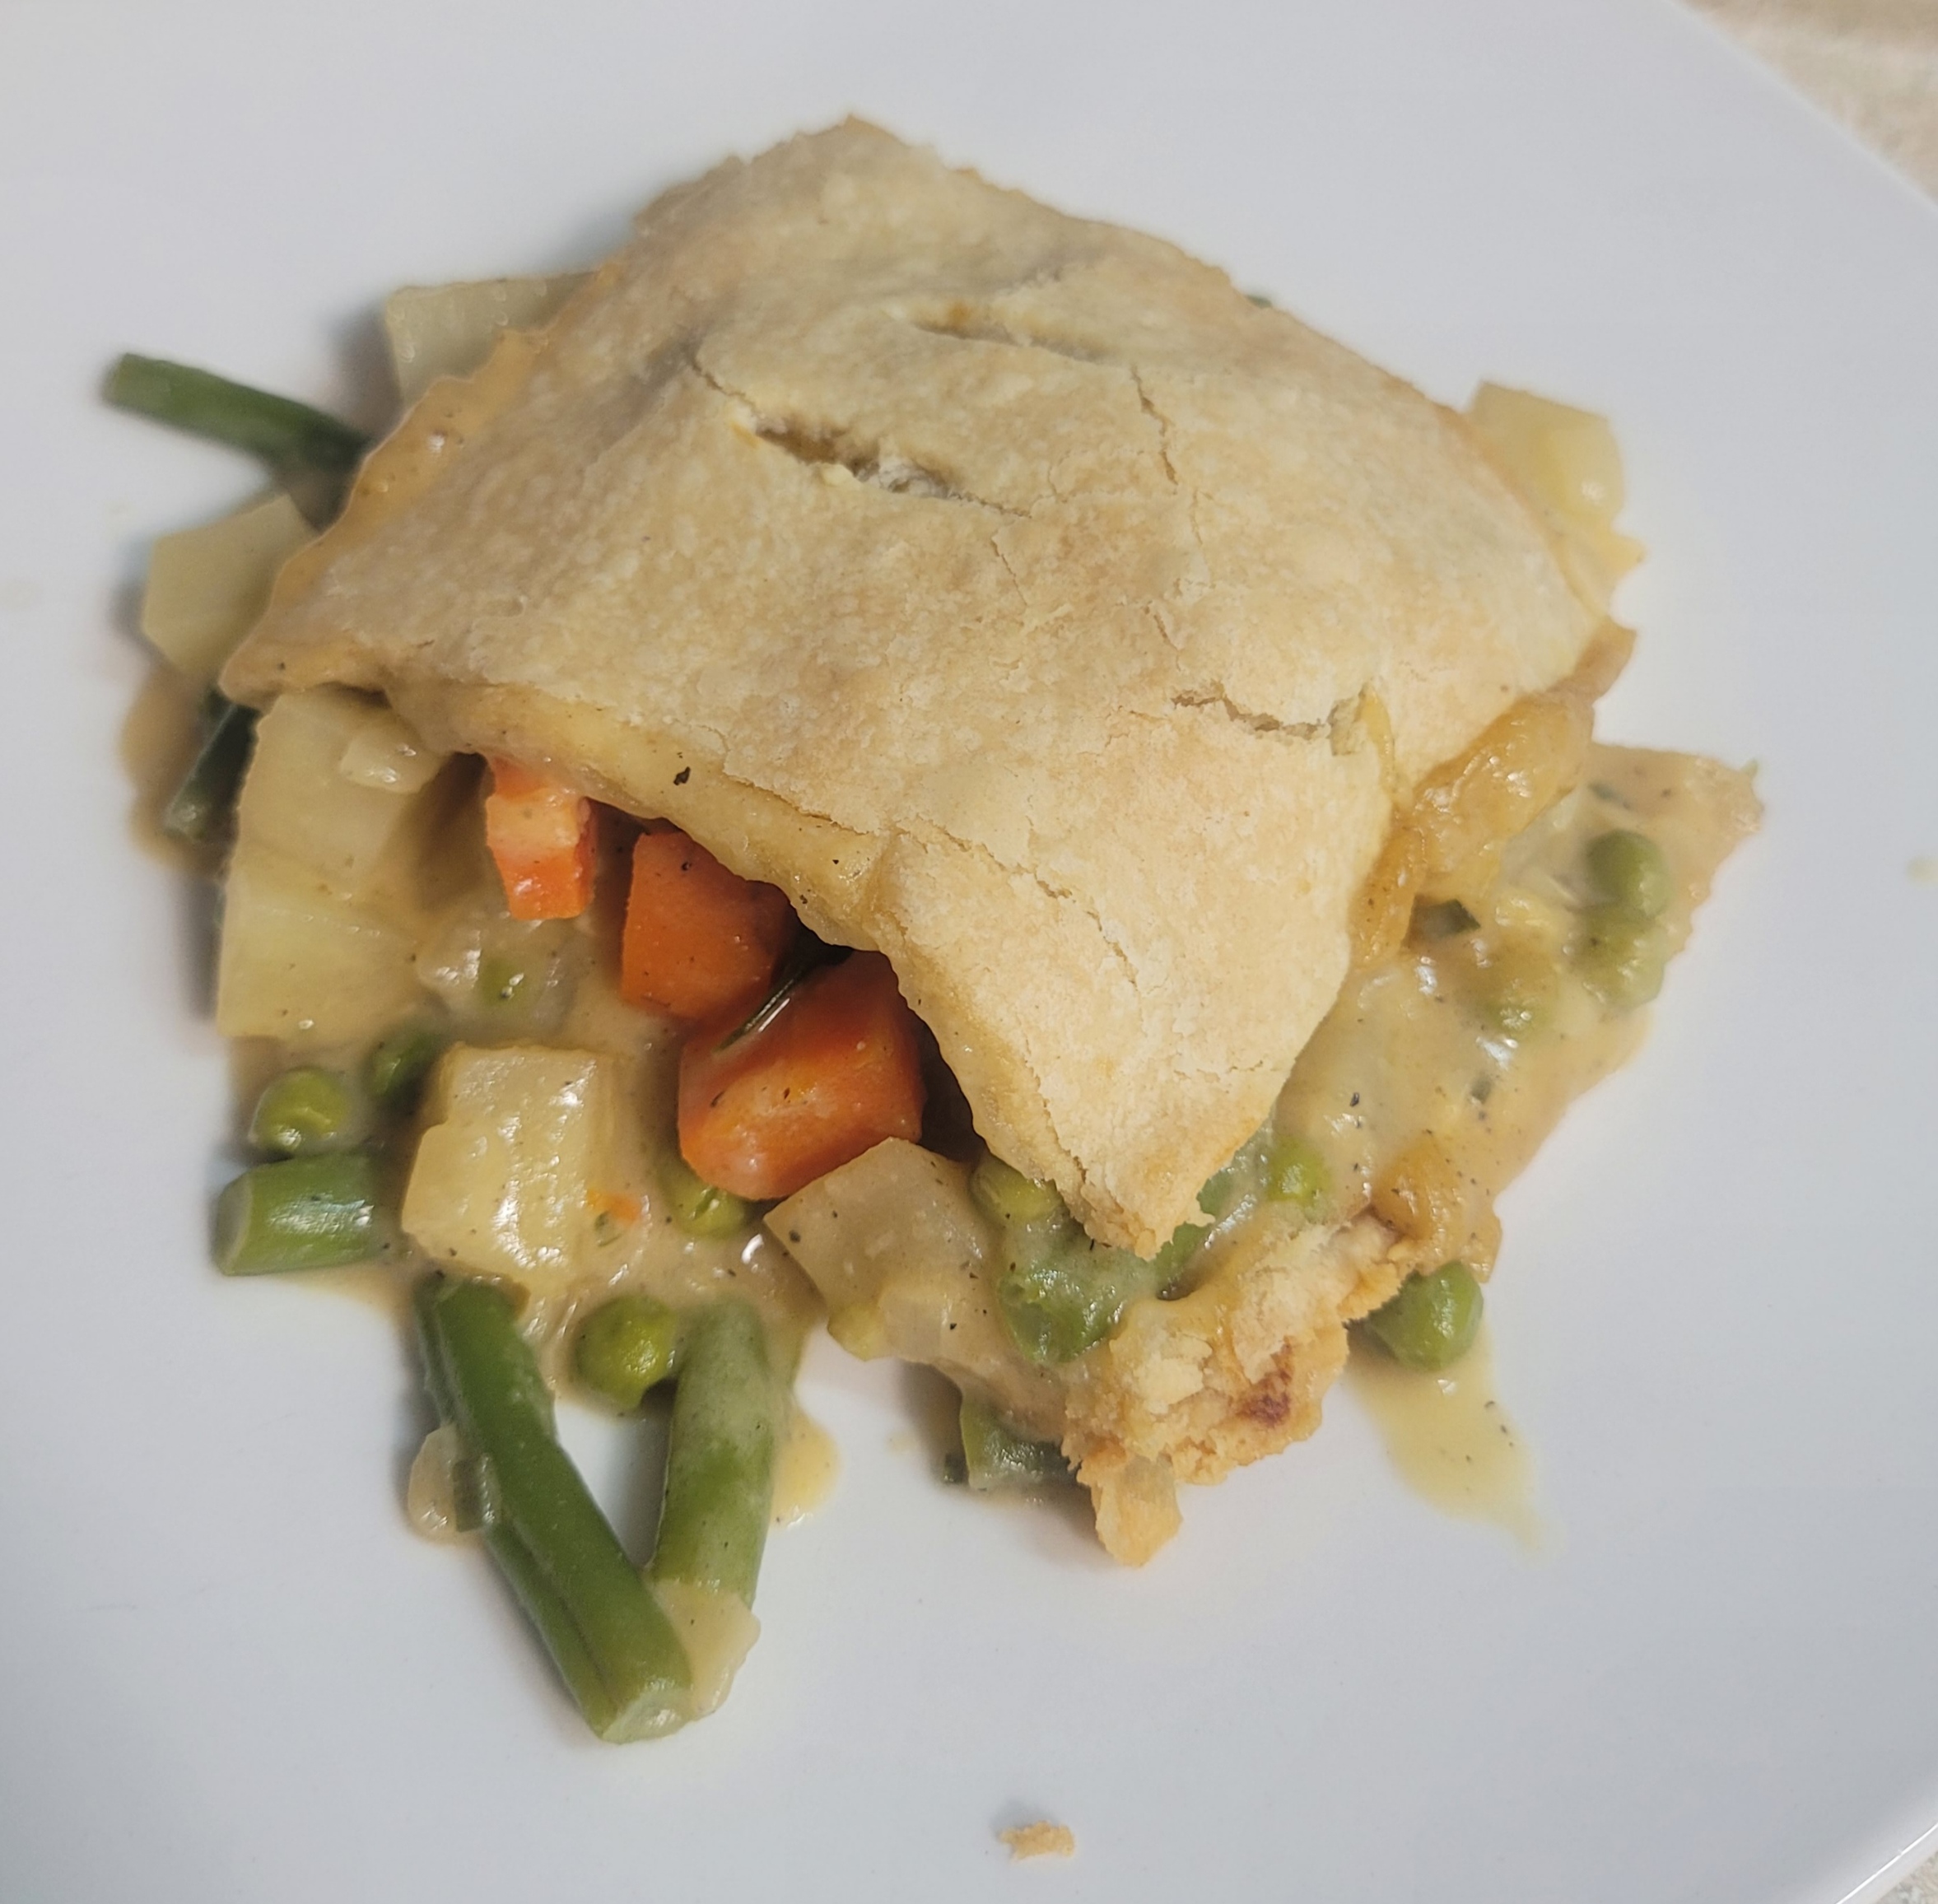 Vegetable Pot Pie from Scratch (Except the Crust), Challenge #11